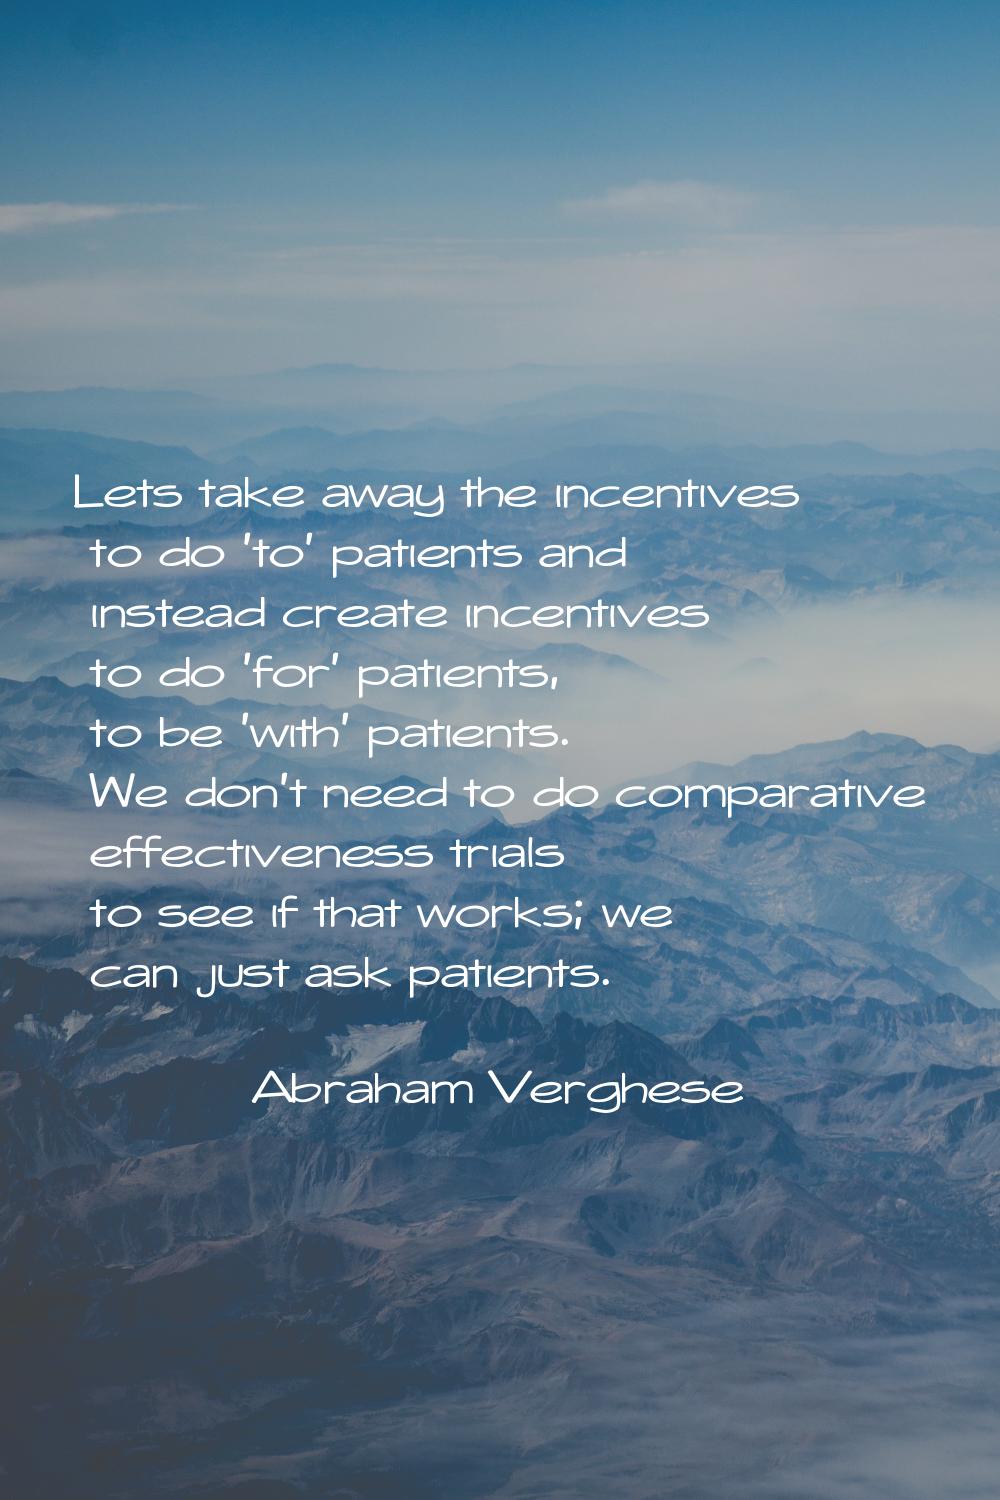 Lets take away the incentives to do 'to' patients and instead create incentives to do 'for' patient